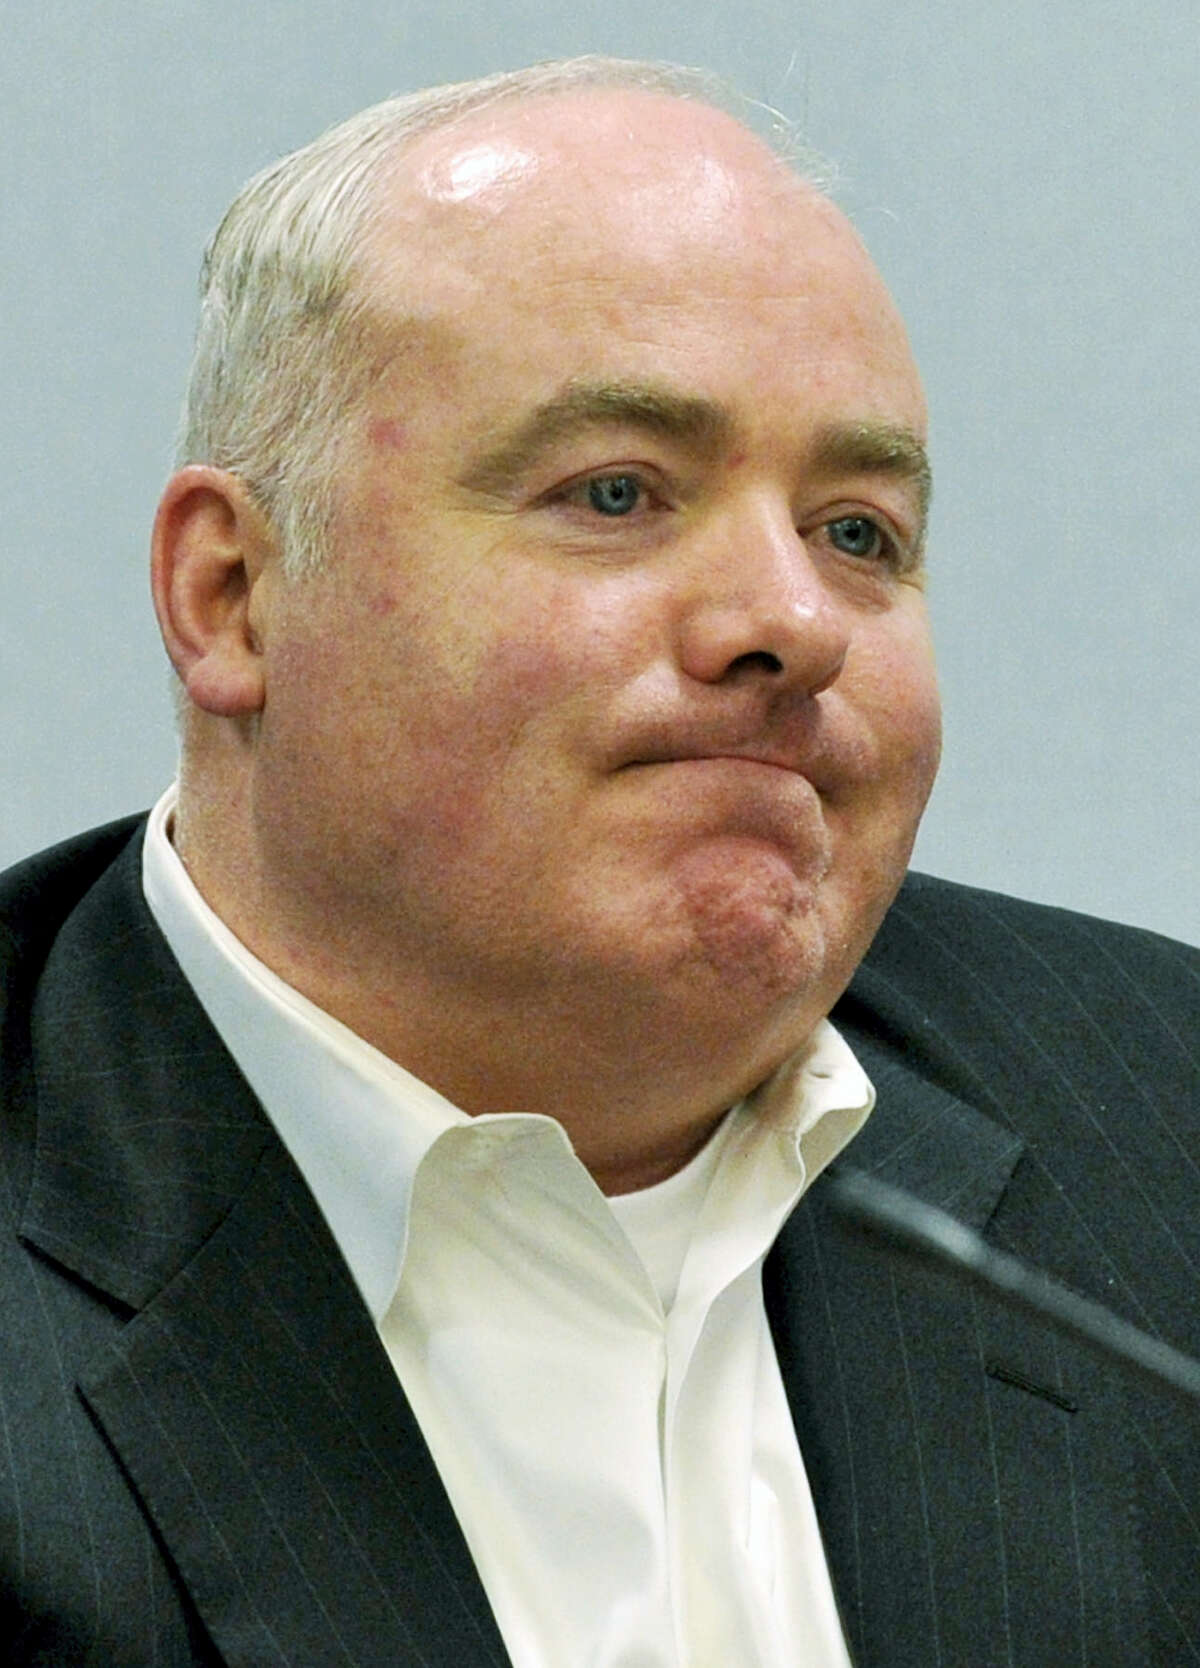 Michael Skakel listens in 2013 to his former defense attorney Mickey Sherman testify at Skakel’s habeas corpus hearing at Rockville Superior Court in Vernon. In a new book released Tuesday, July 12, 2016, Robert F. Kennedy Jr., argues that Skakel, his cousin, is innocent of the murder. Kennedy’s book makes a case that two visitors from New York, who have never been charged, killed the girl.